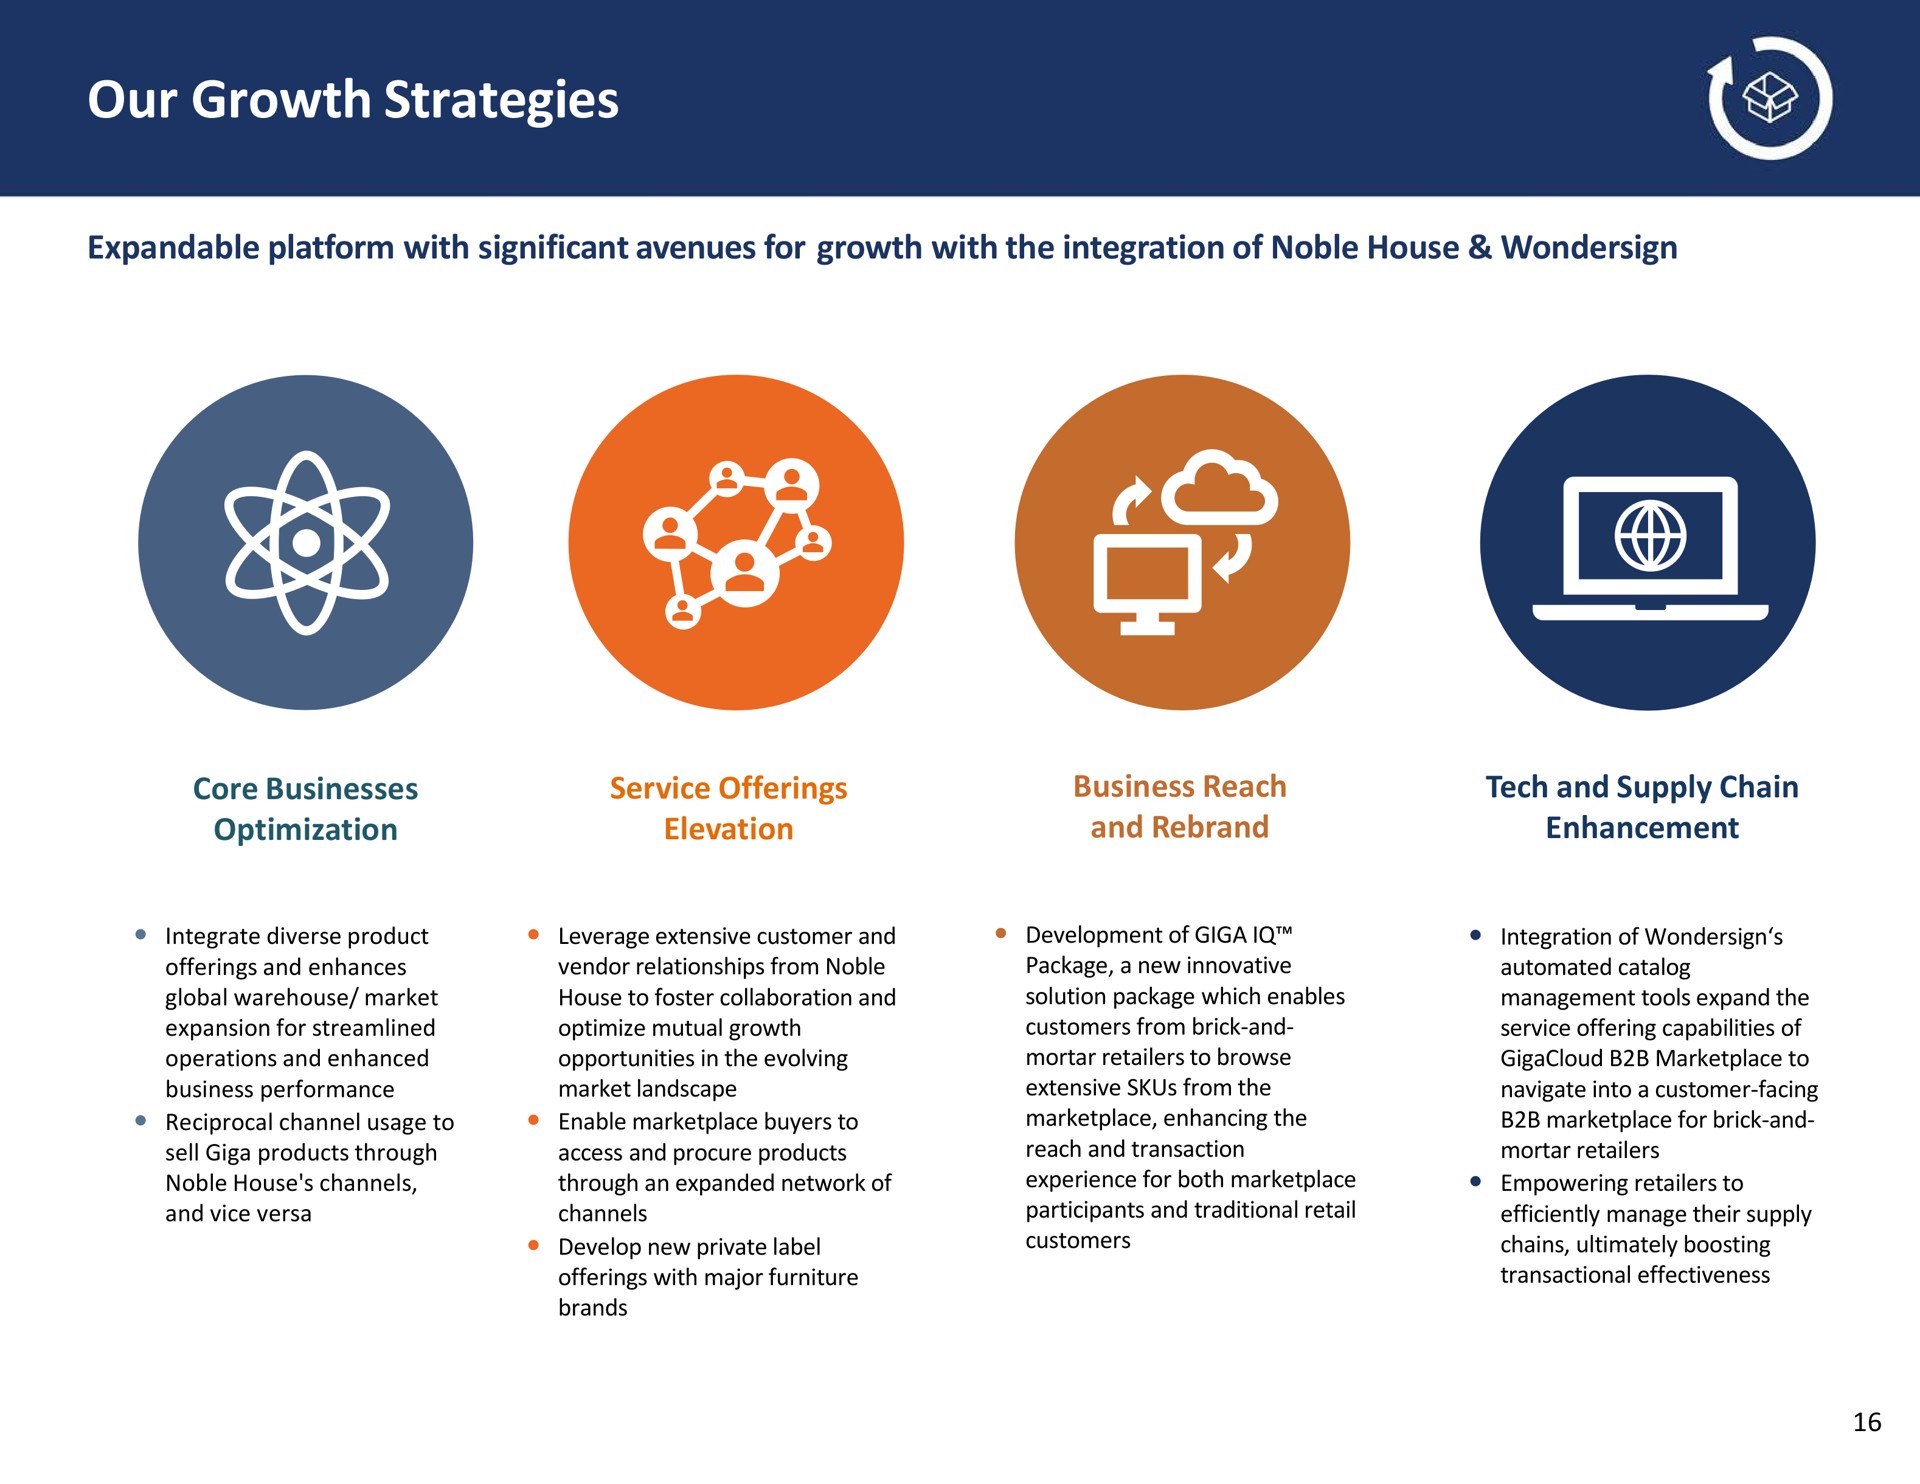 our growth strategies | GigaCloud Technology